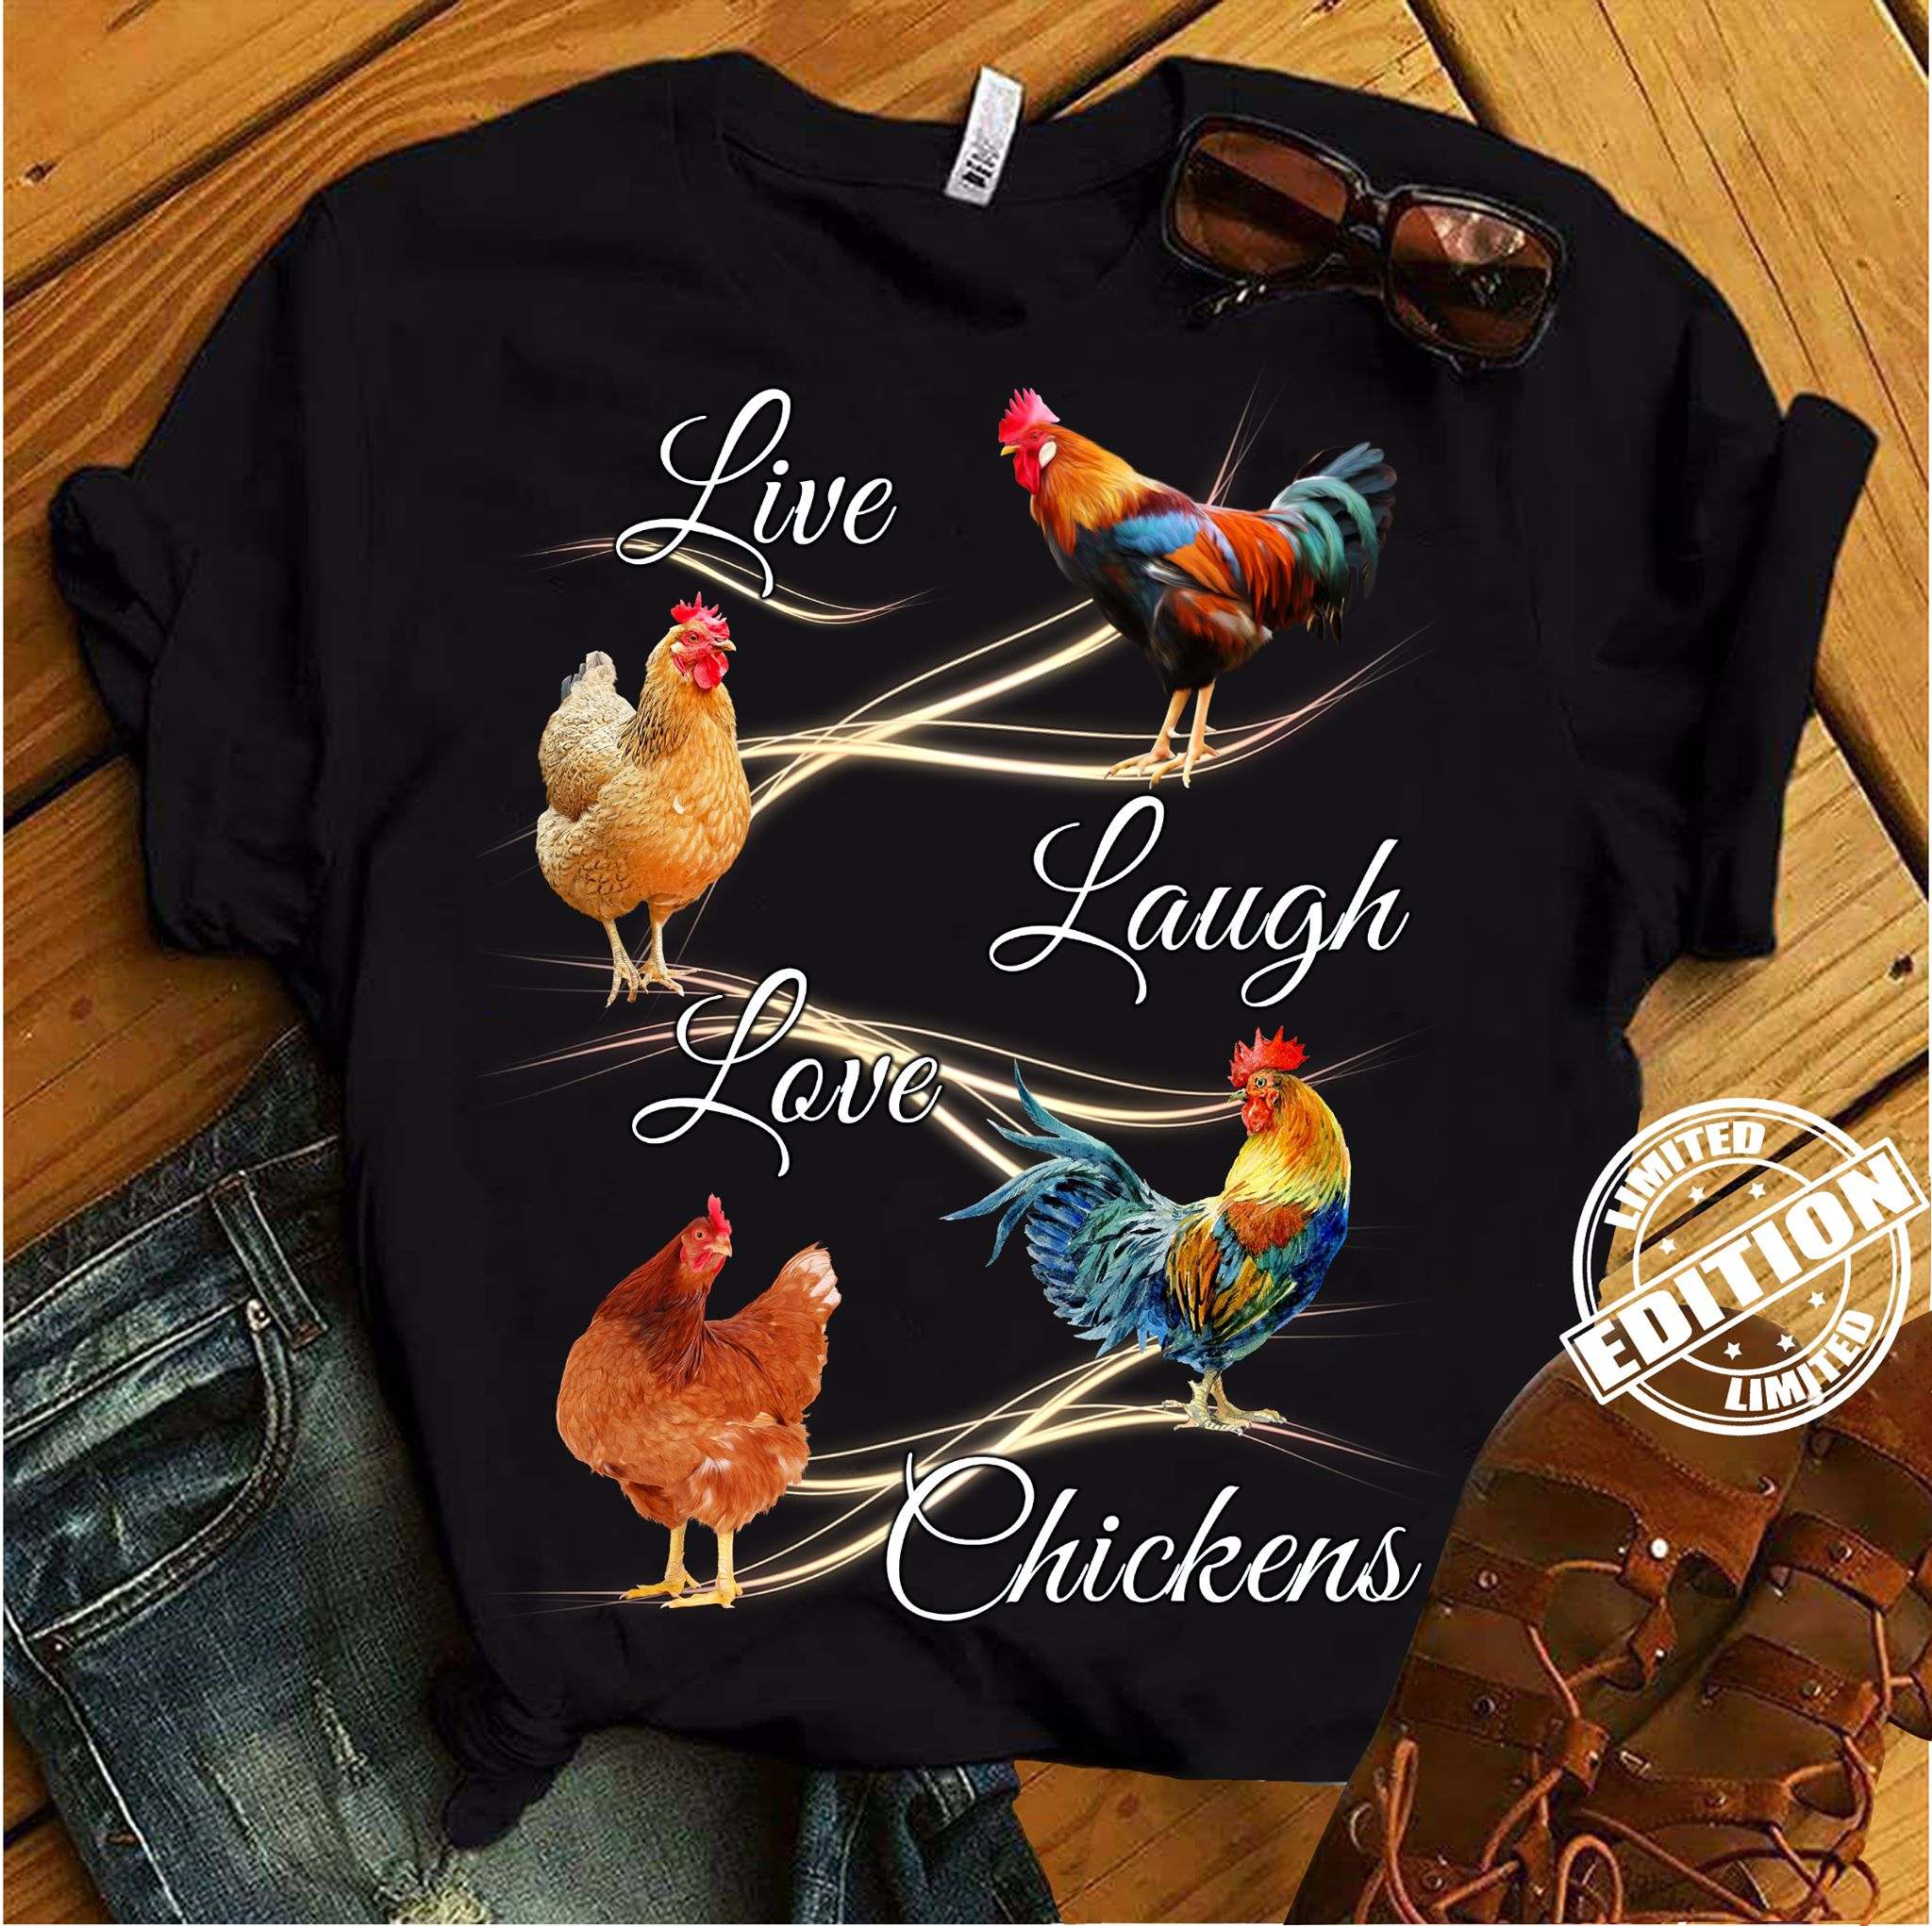 Live laugh love chickens - Chicken lover, T-shirt for chicken person